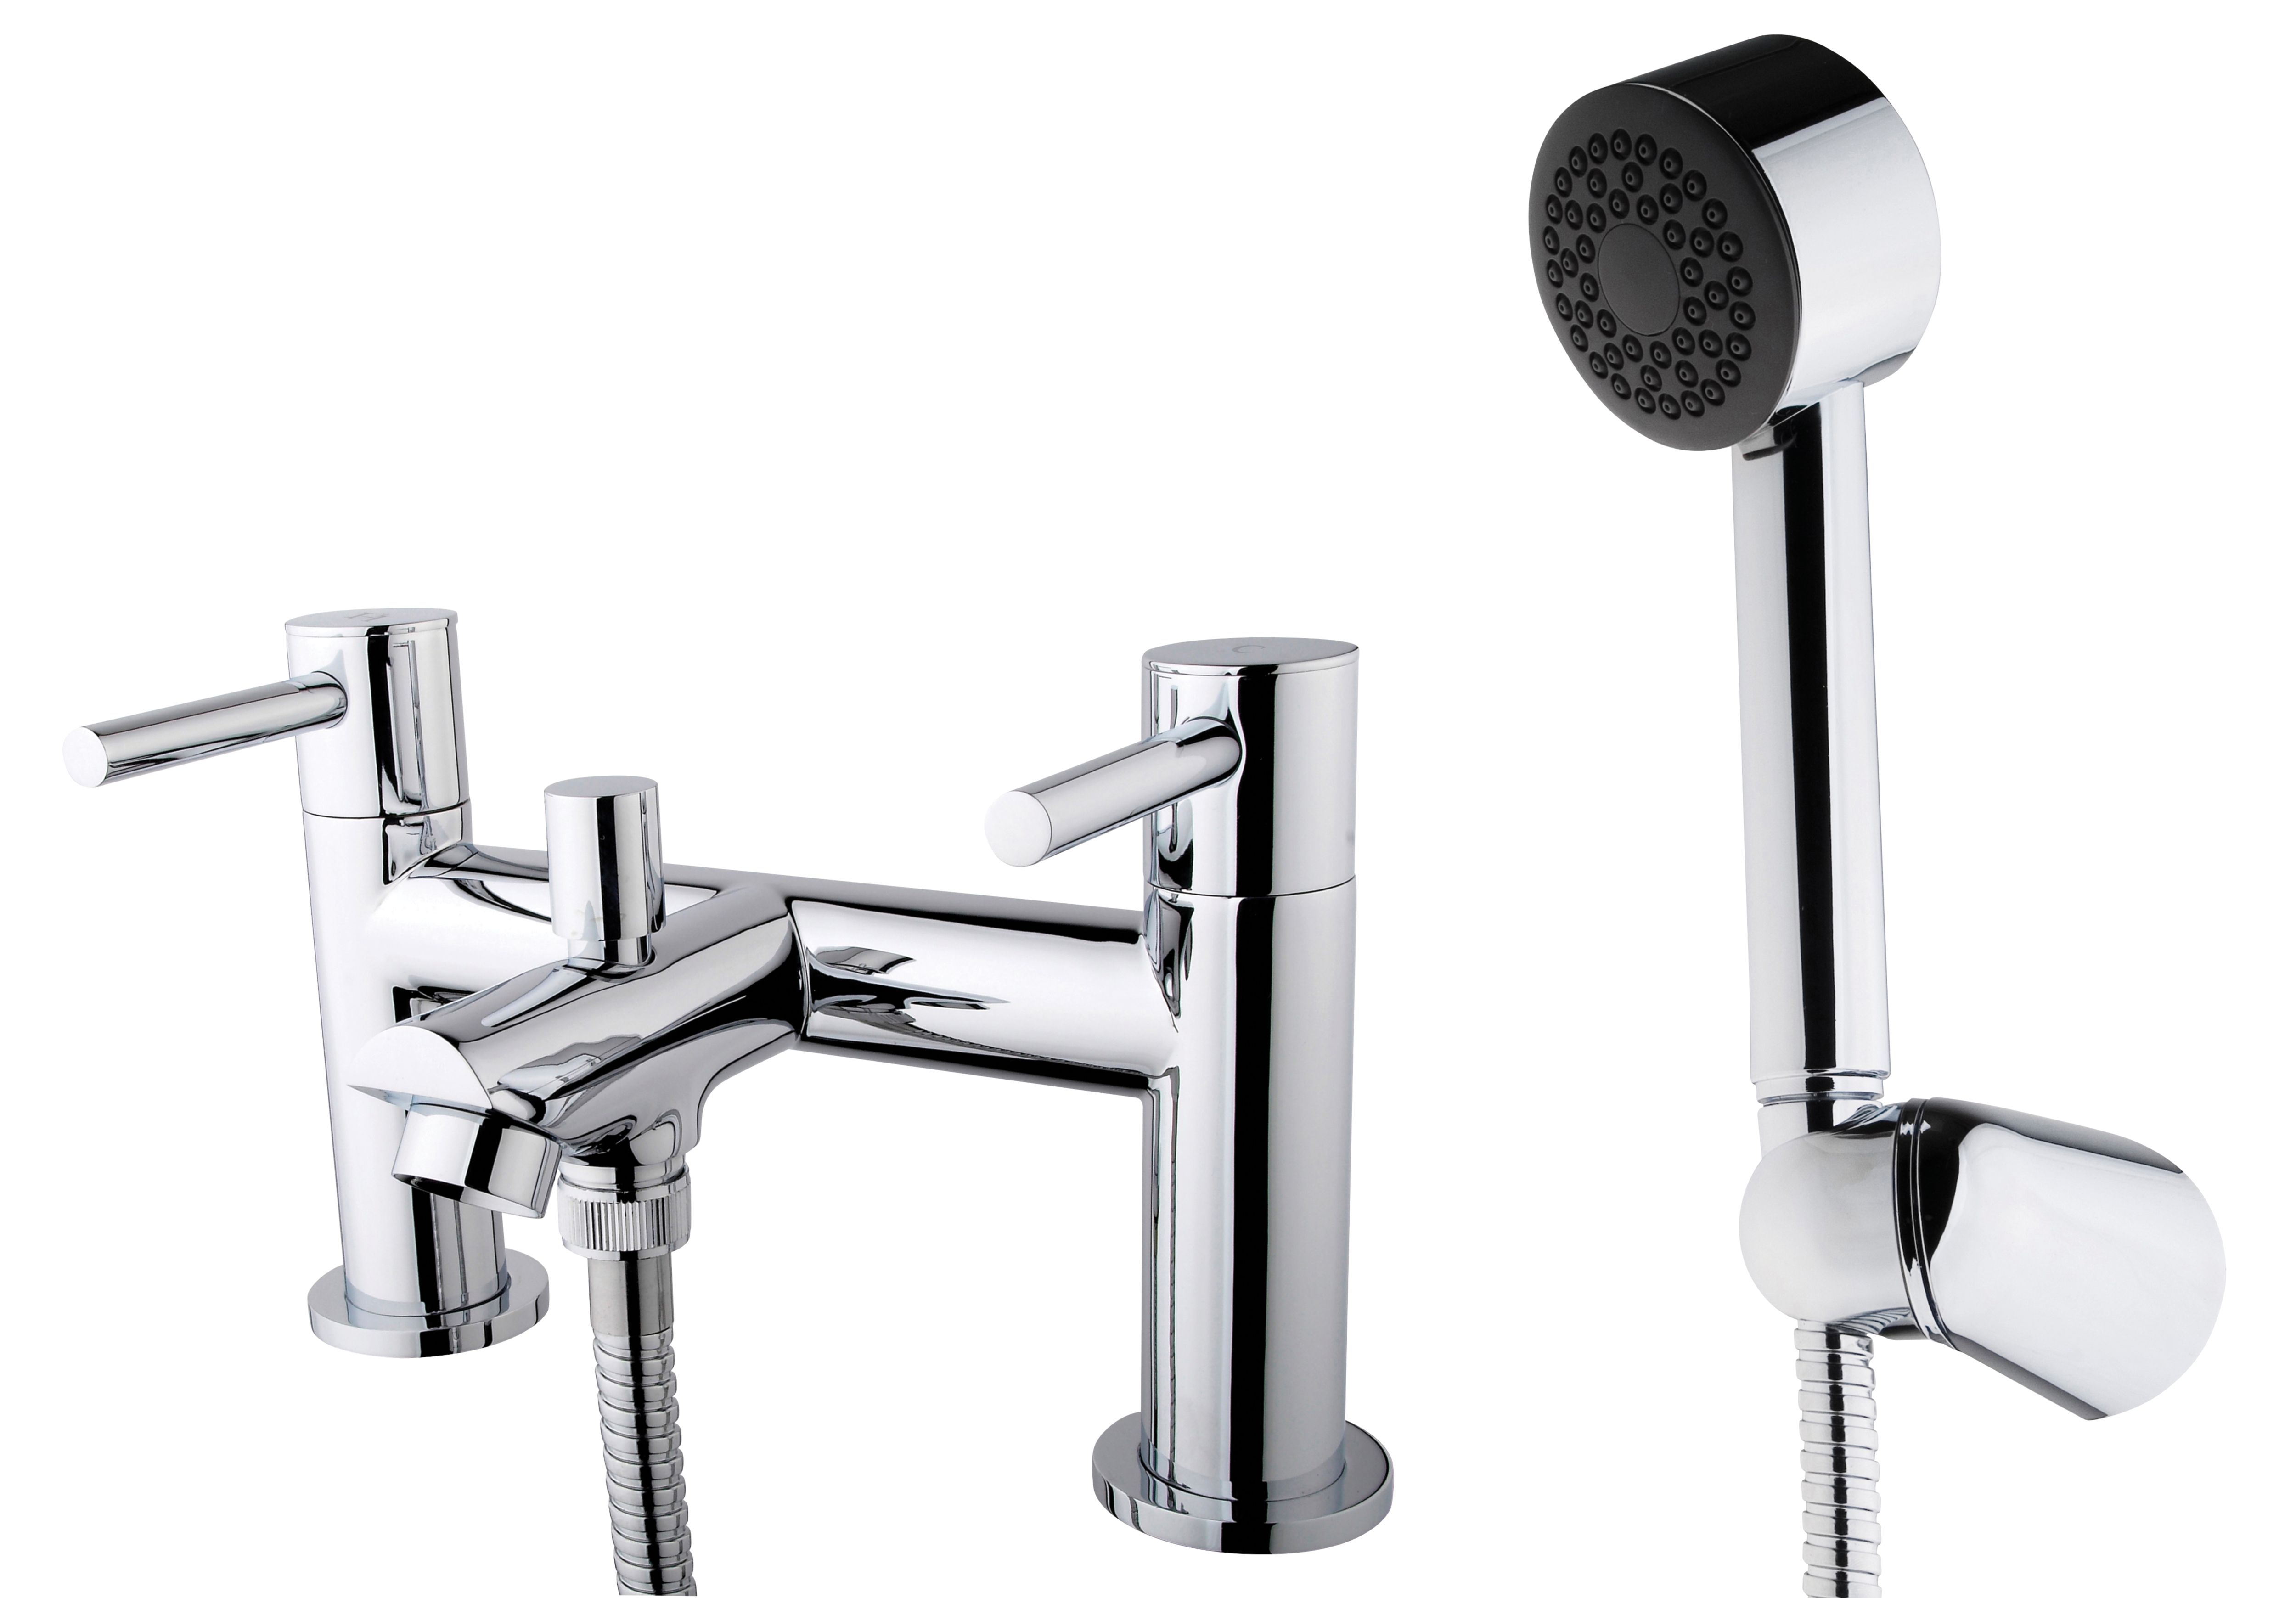 Image of Wickes Mirang Chrome Bath Shower Mixer Tap